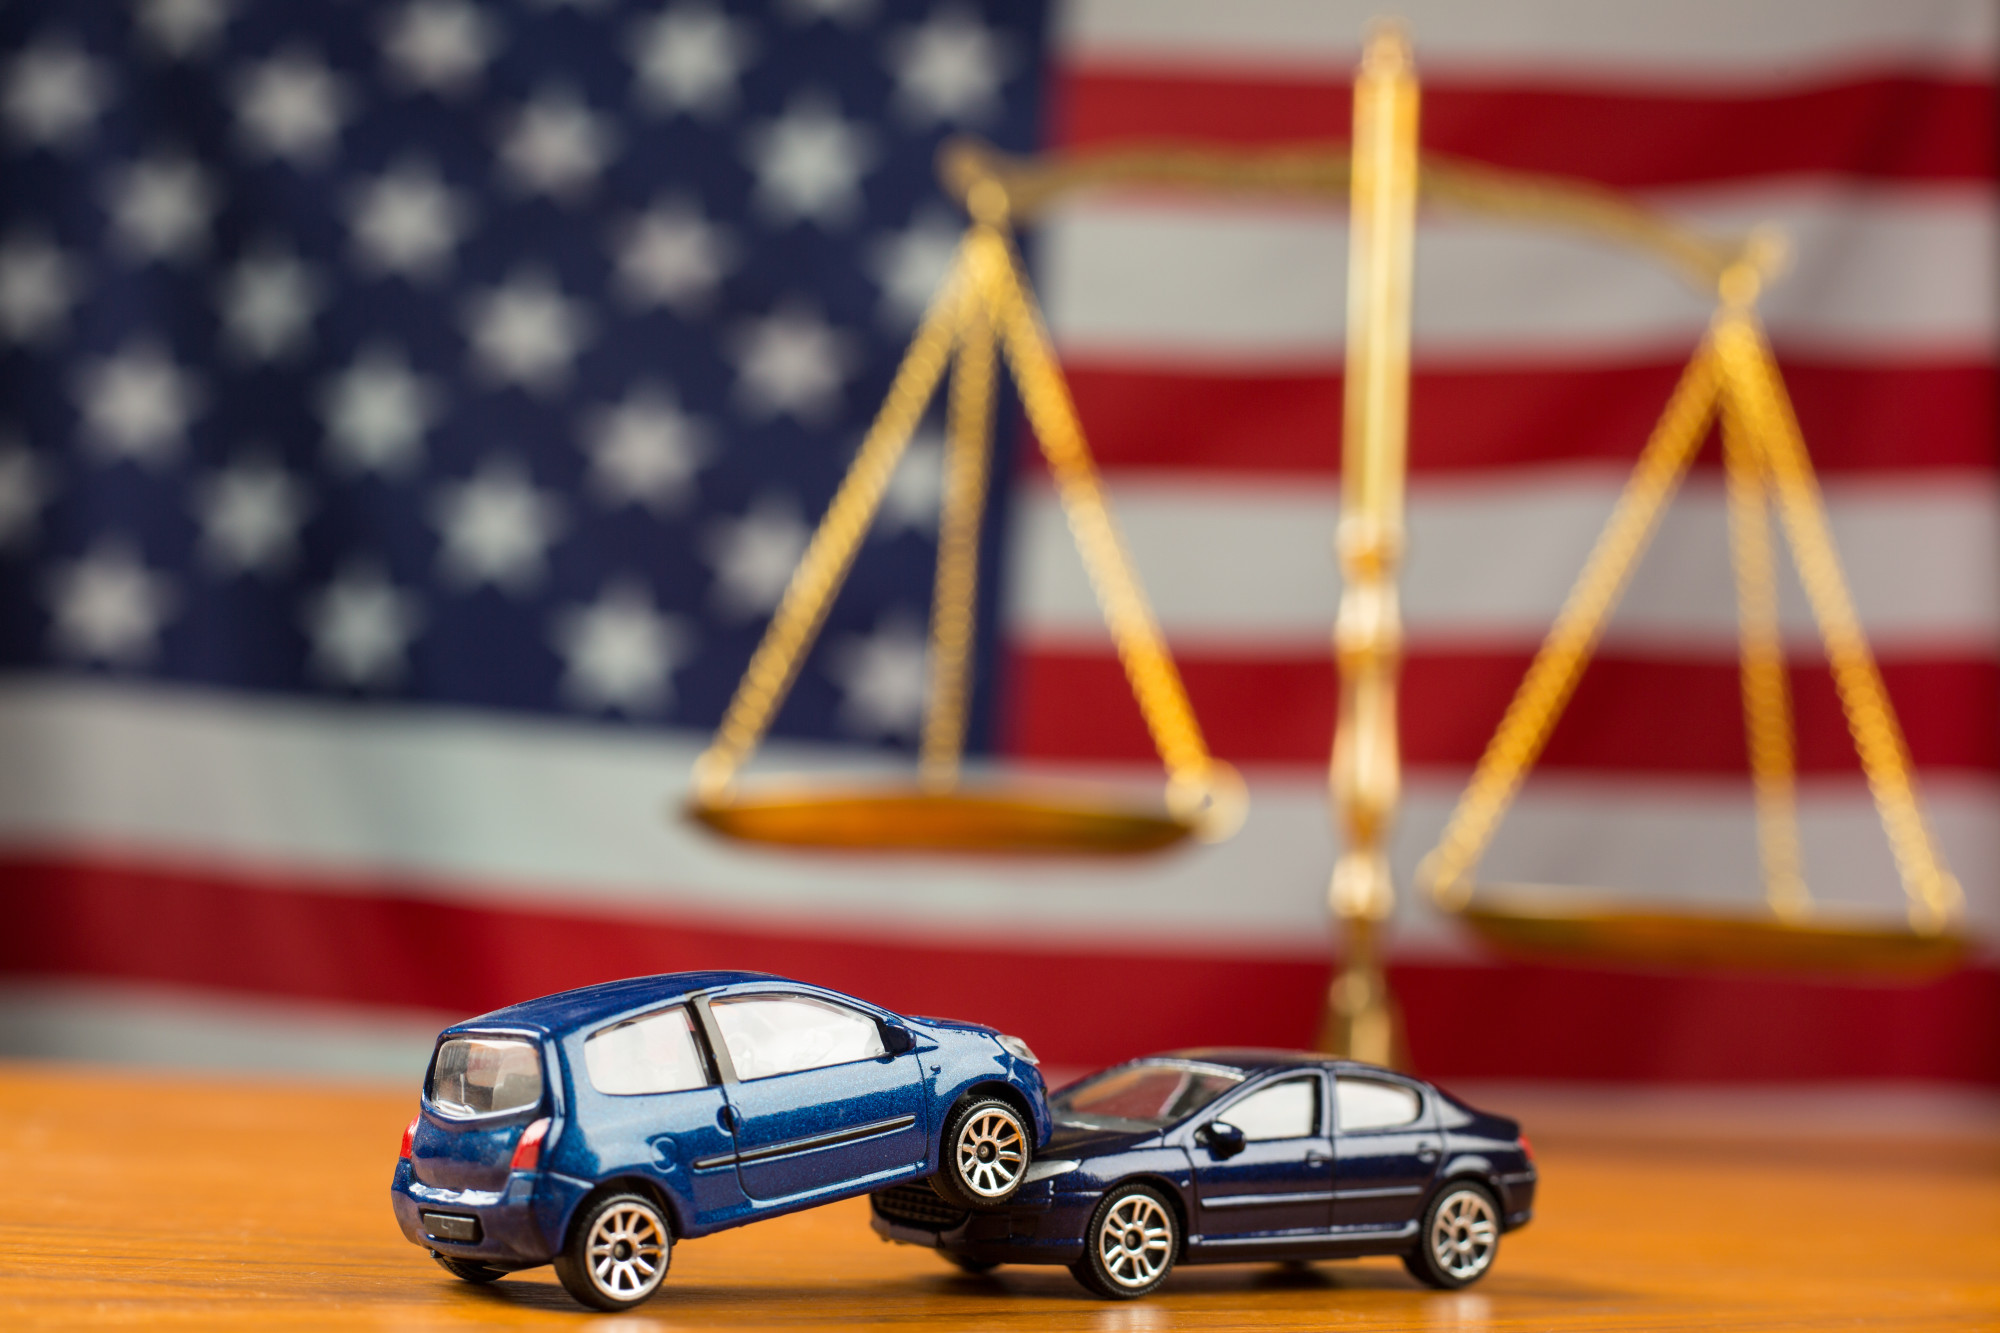 Car Accident Demonstrated Using Die Cast Toys with Law Scale and American Flag in the Background